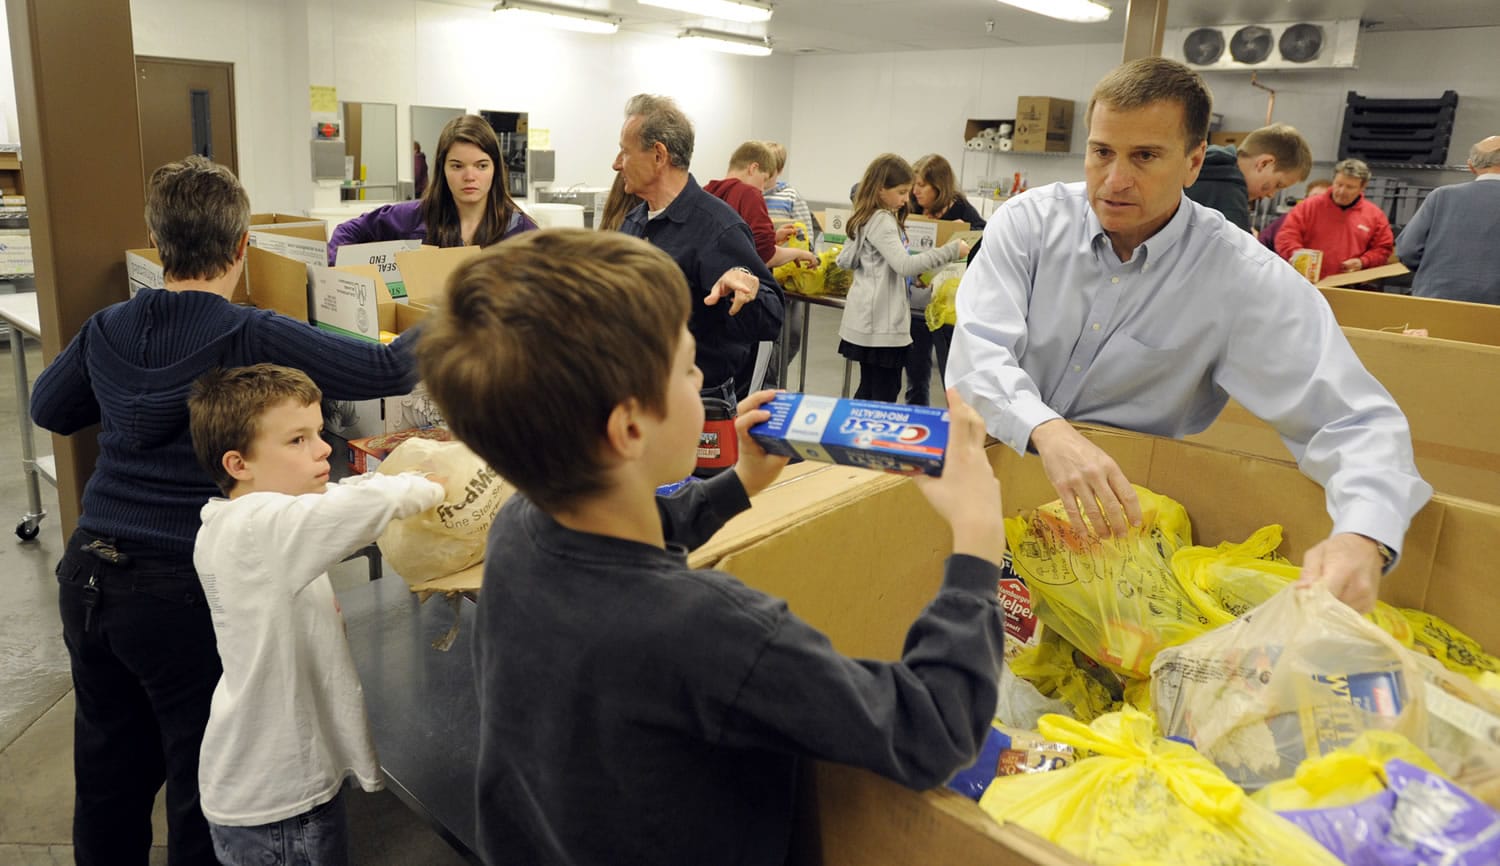 Alan Hamilton, the new executive director of the Clark County Food Bank, works with volunteers from Congregation Kol Ami, including Eli Mitchell-Hopmeier, center, and Zeke Mitchell-Hopmeier, left, as they unpack donations collected during the letter carriers food drive.